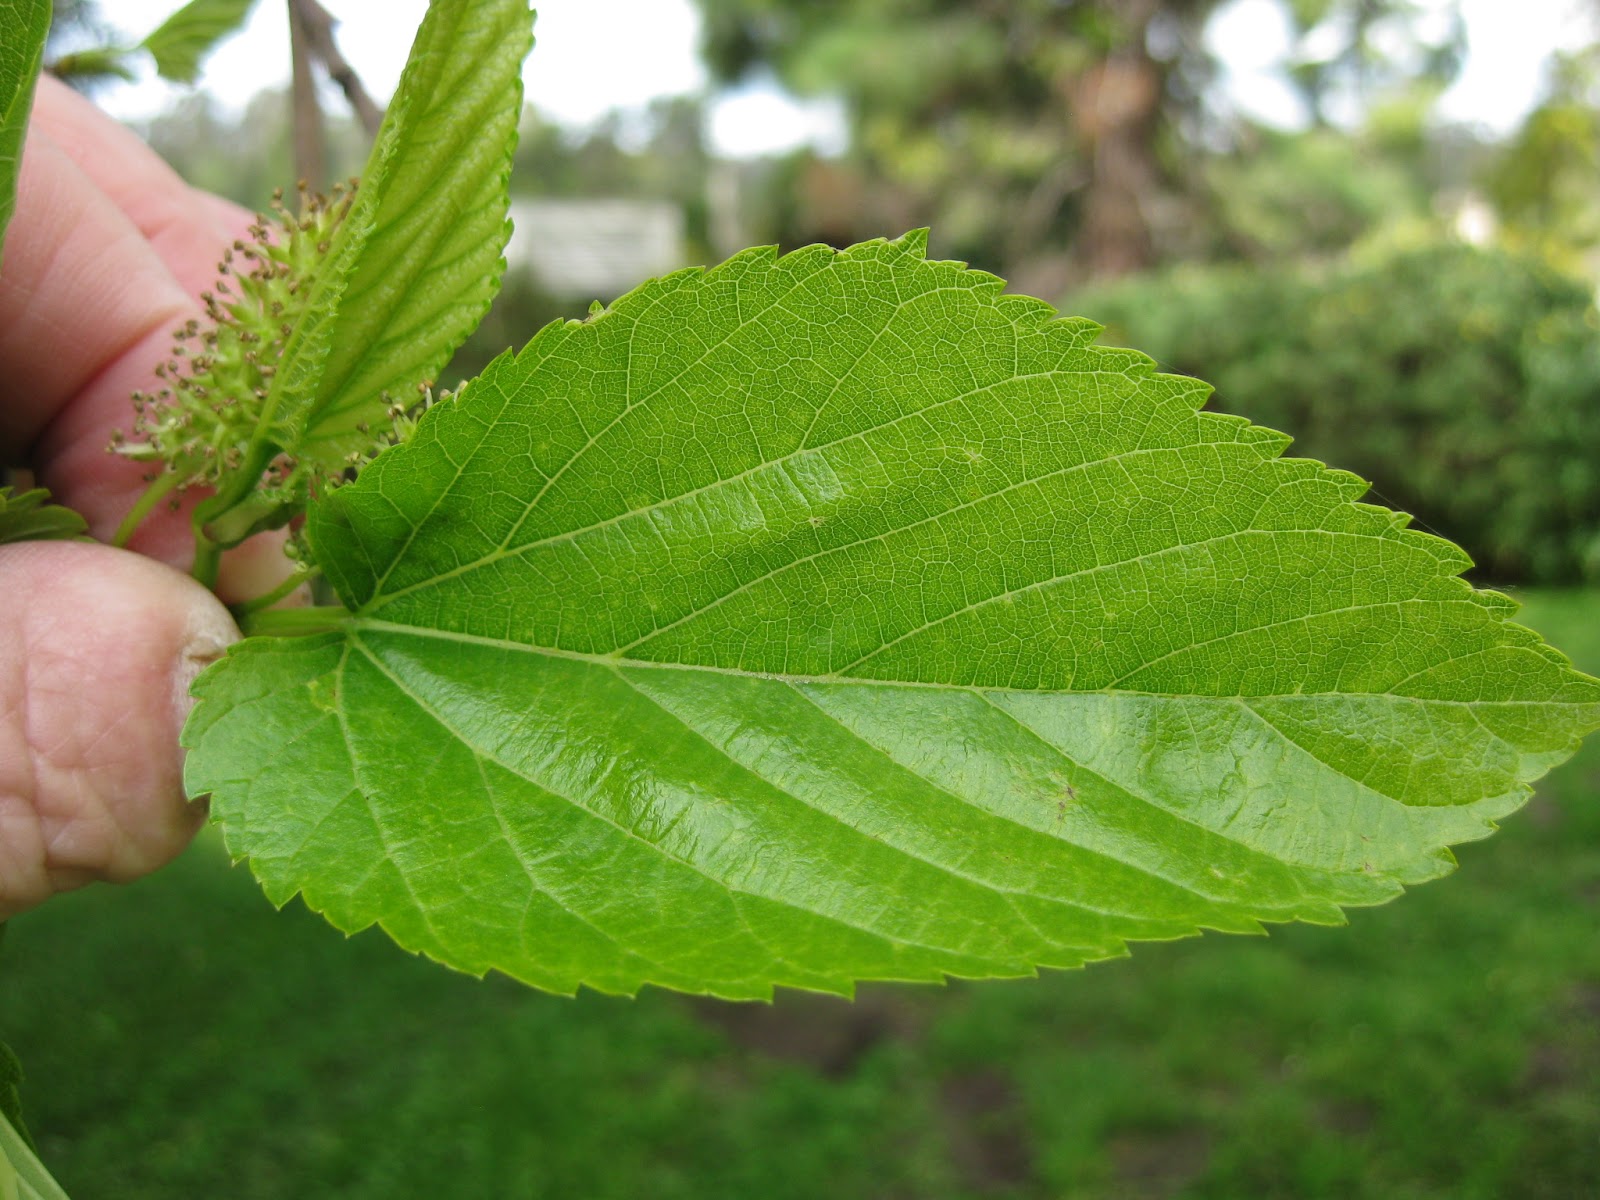 Gallery Photos of "Mulberry Leaves" .